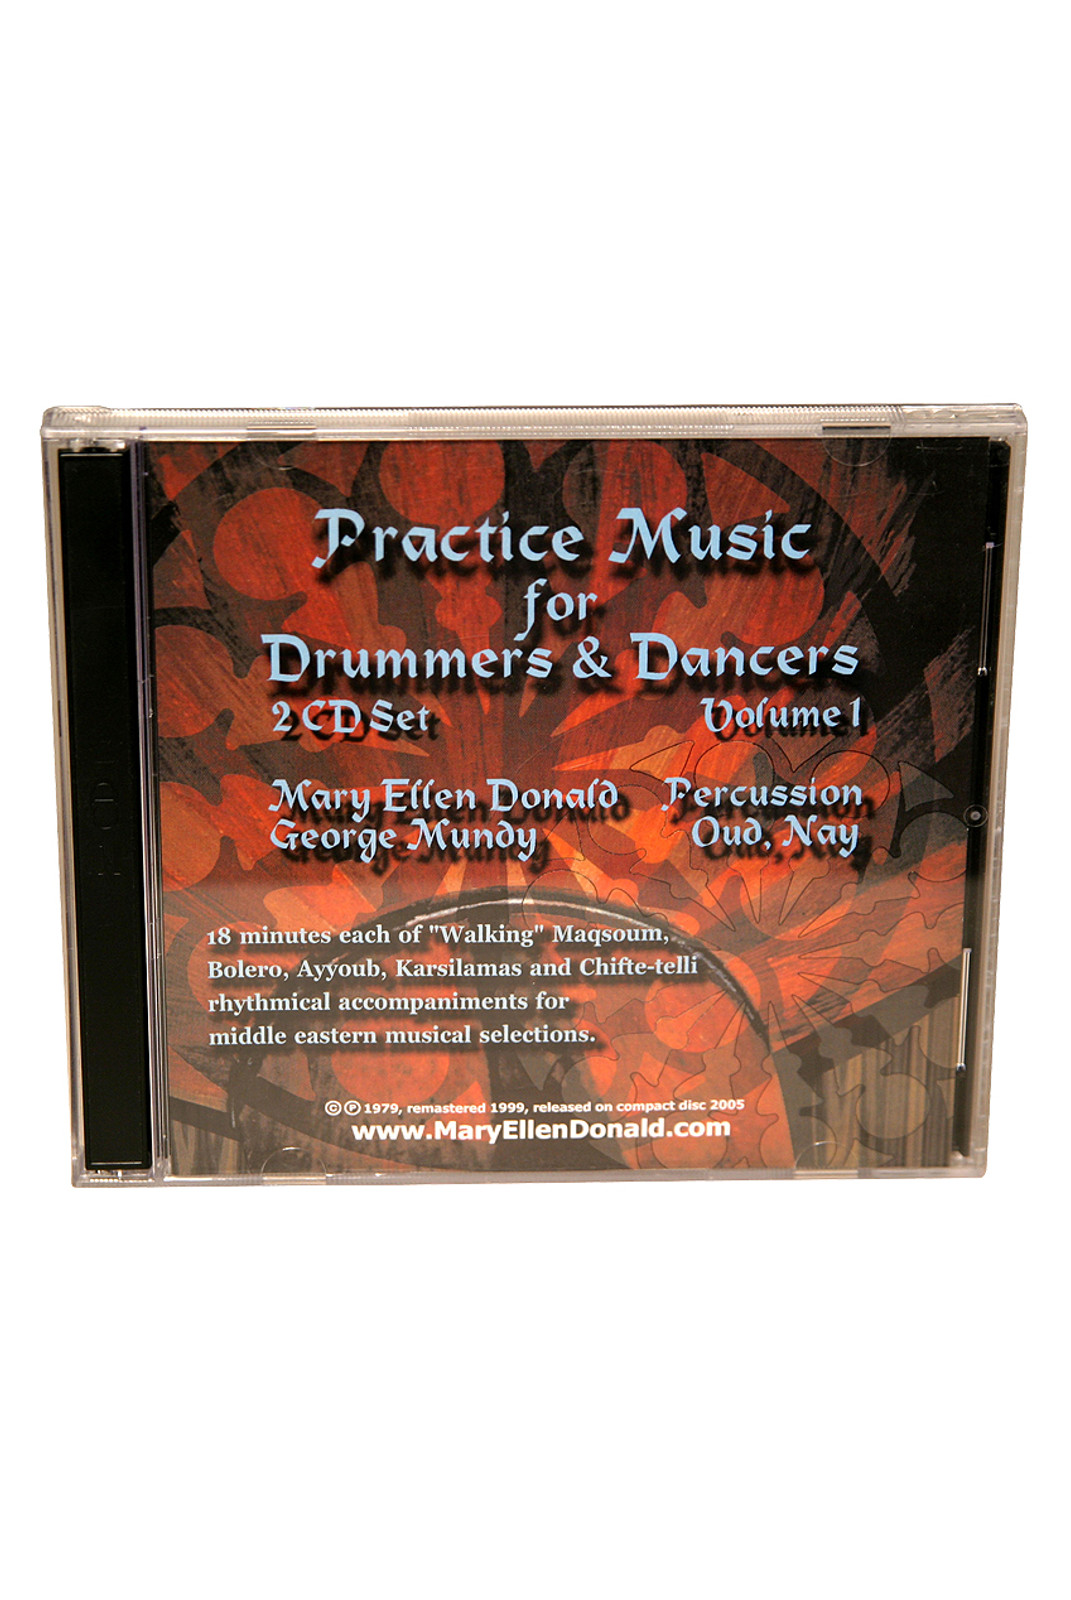 Practice Music for Drummers and Dancers CD Volume 1 by Mary Ellen Donald